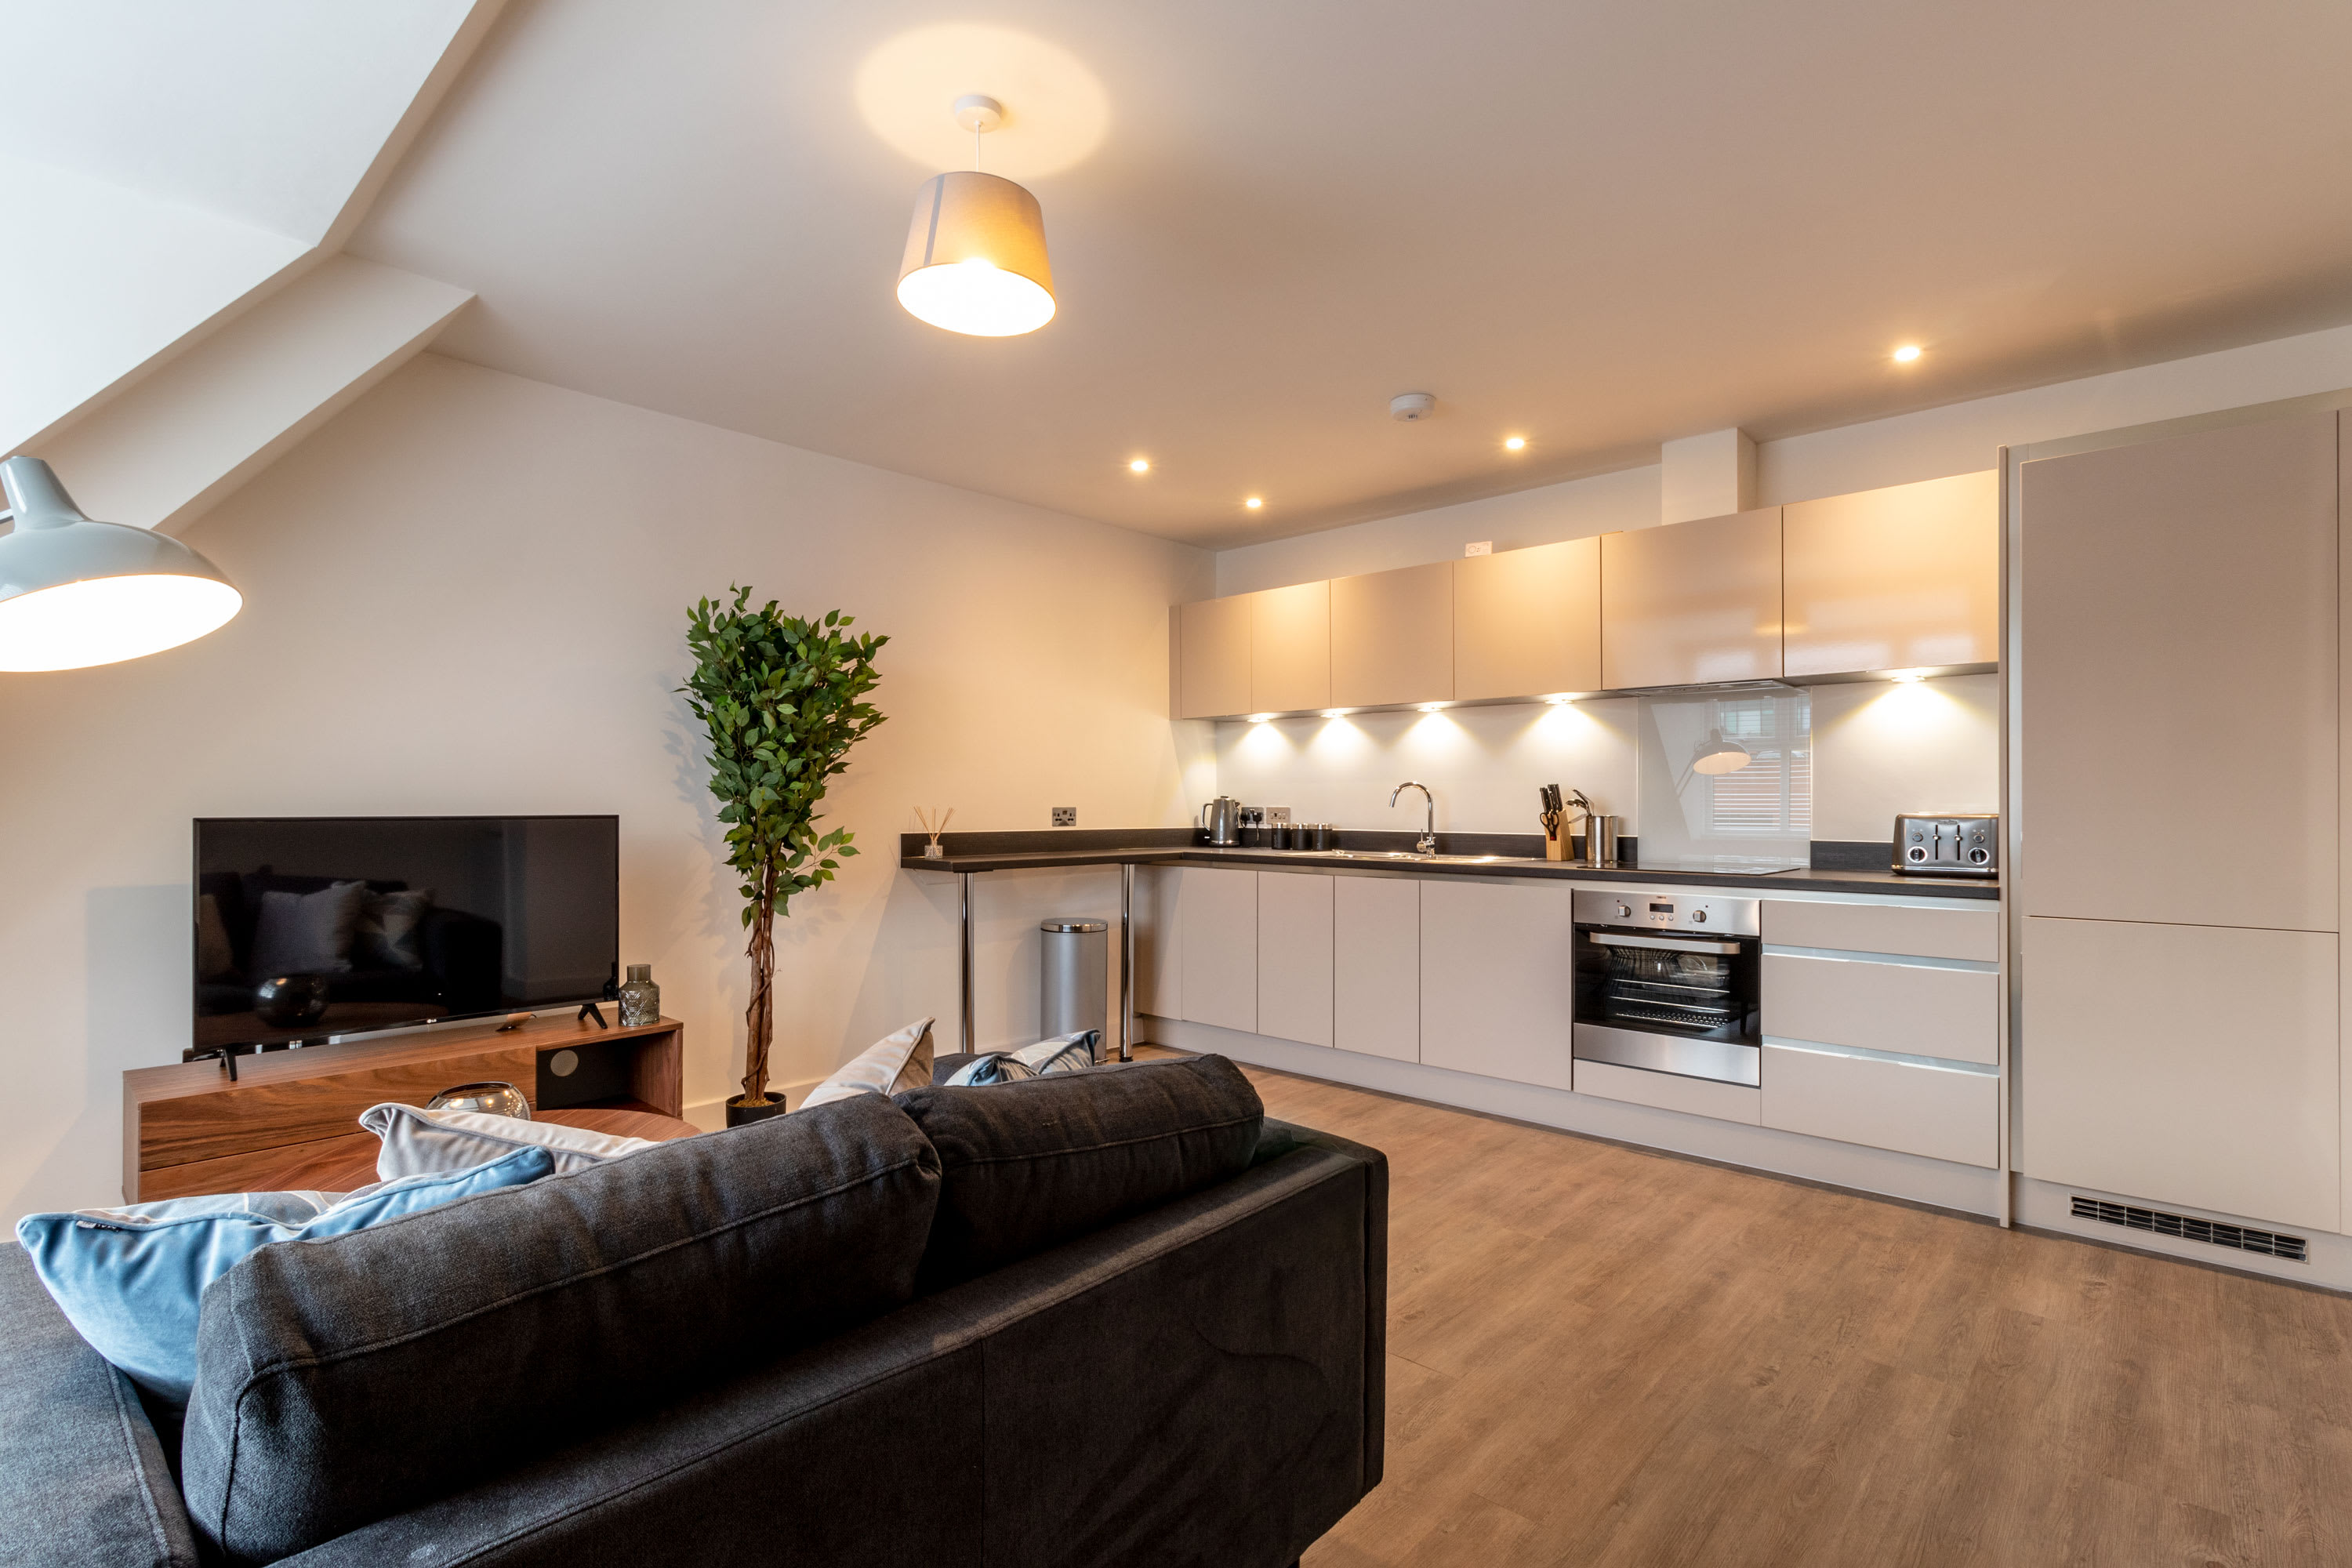 Property Image 2 - Professionally Designed Flat in the Heart of Solihull